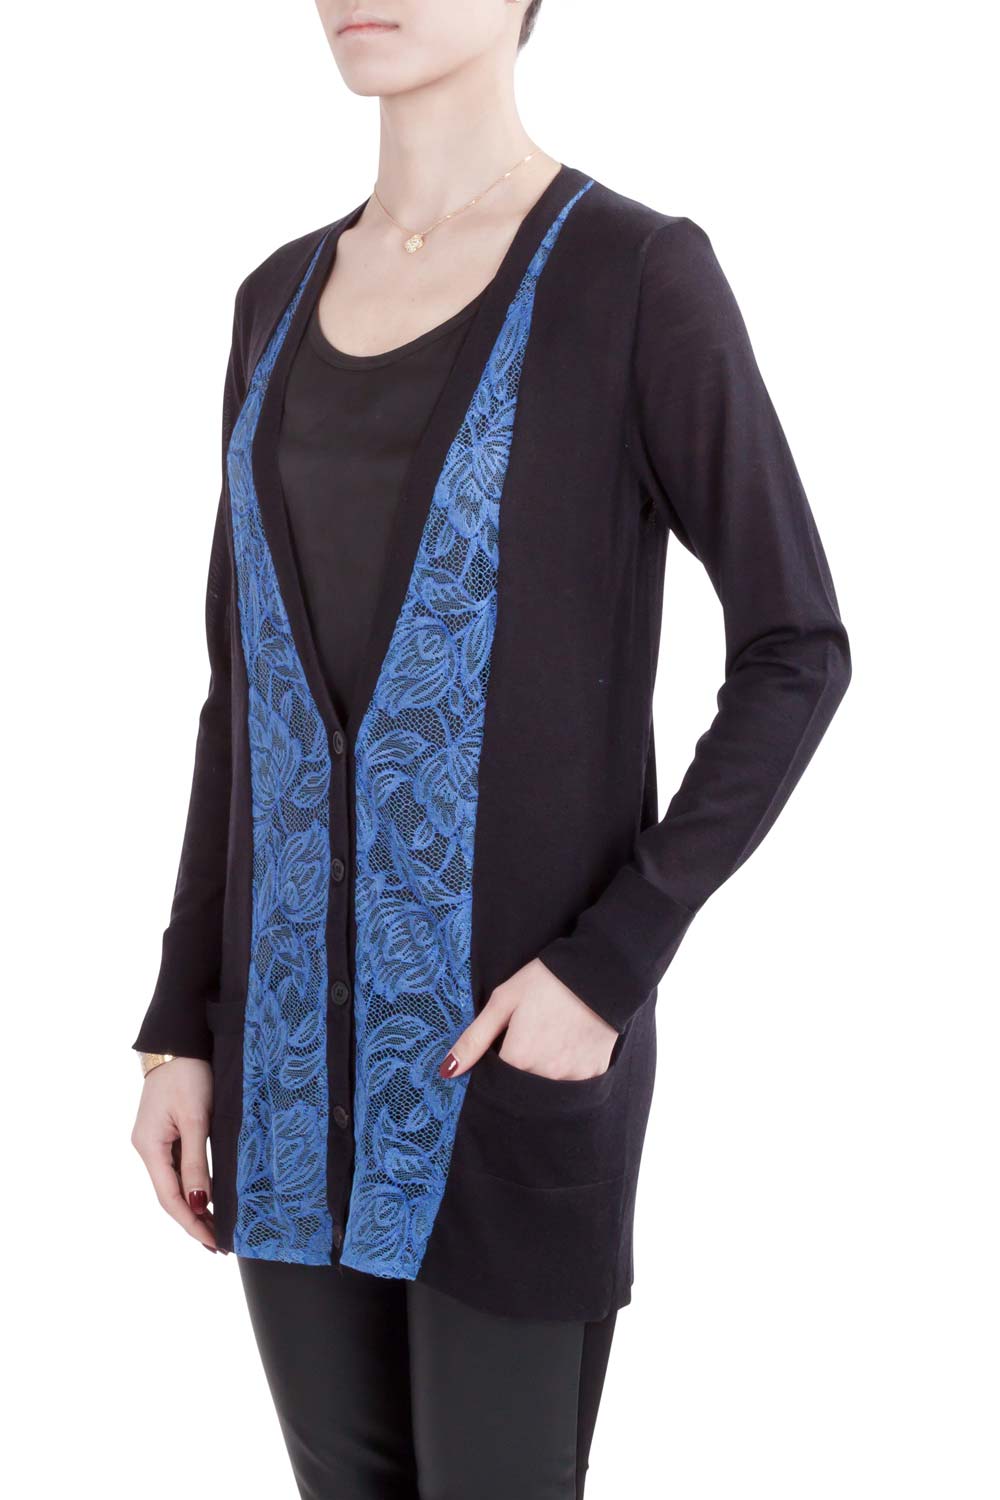 Vera Wang Collection Black and Blue Lace Trim Button Front Cardigan S